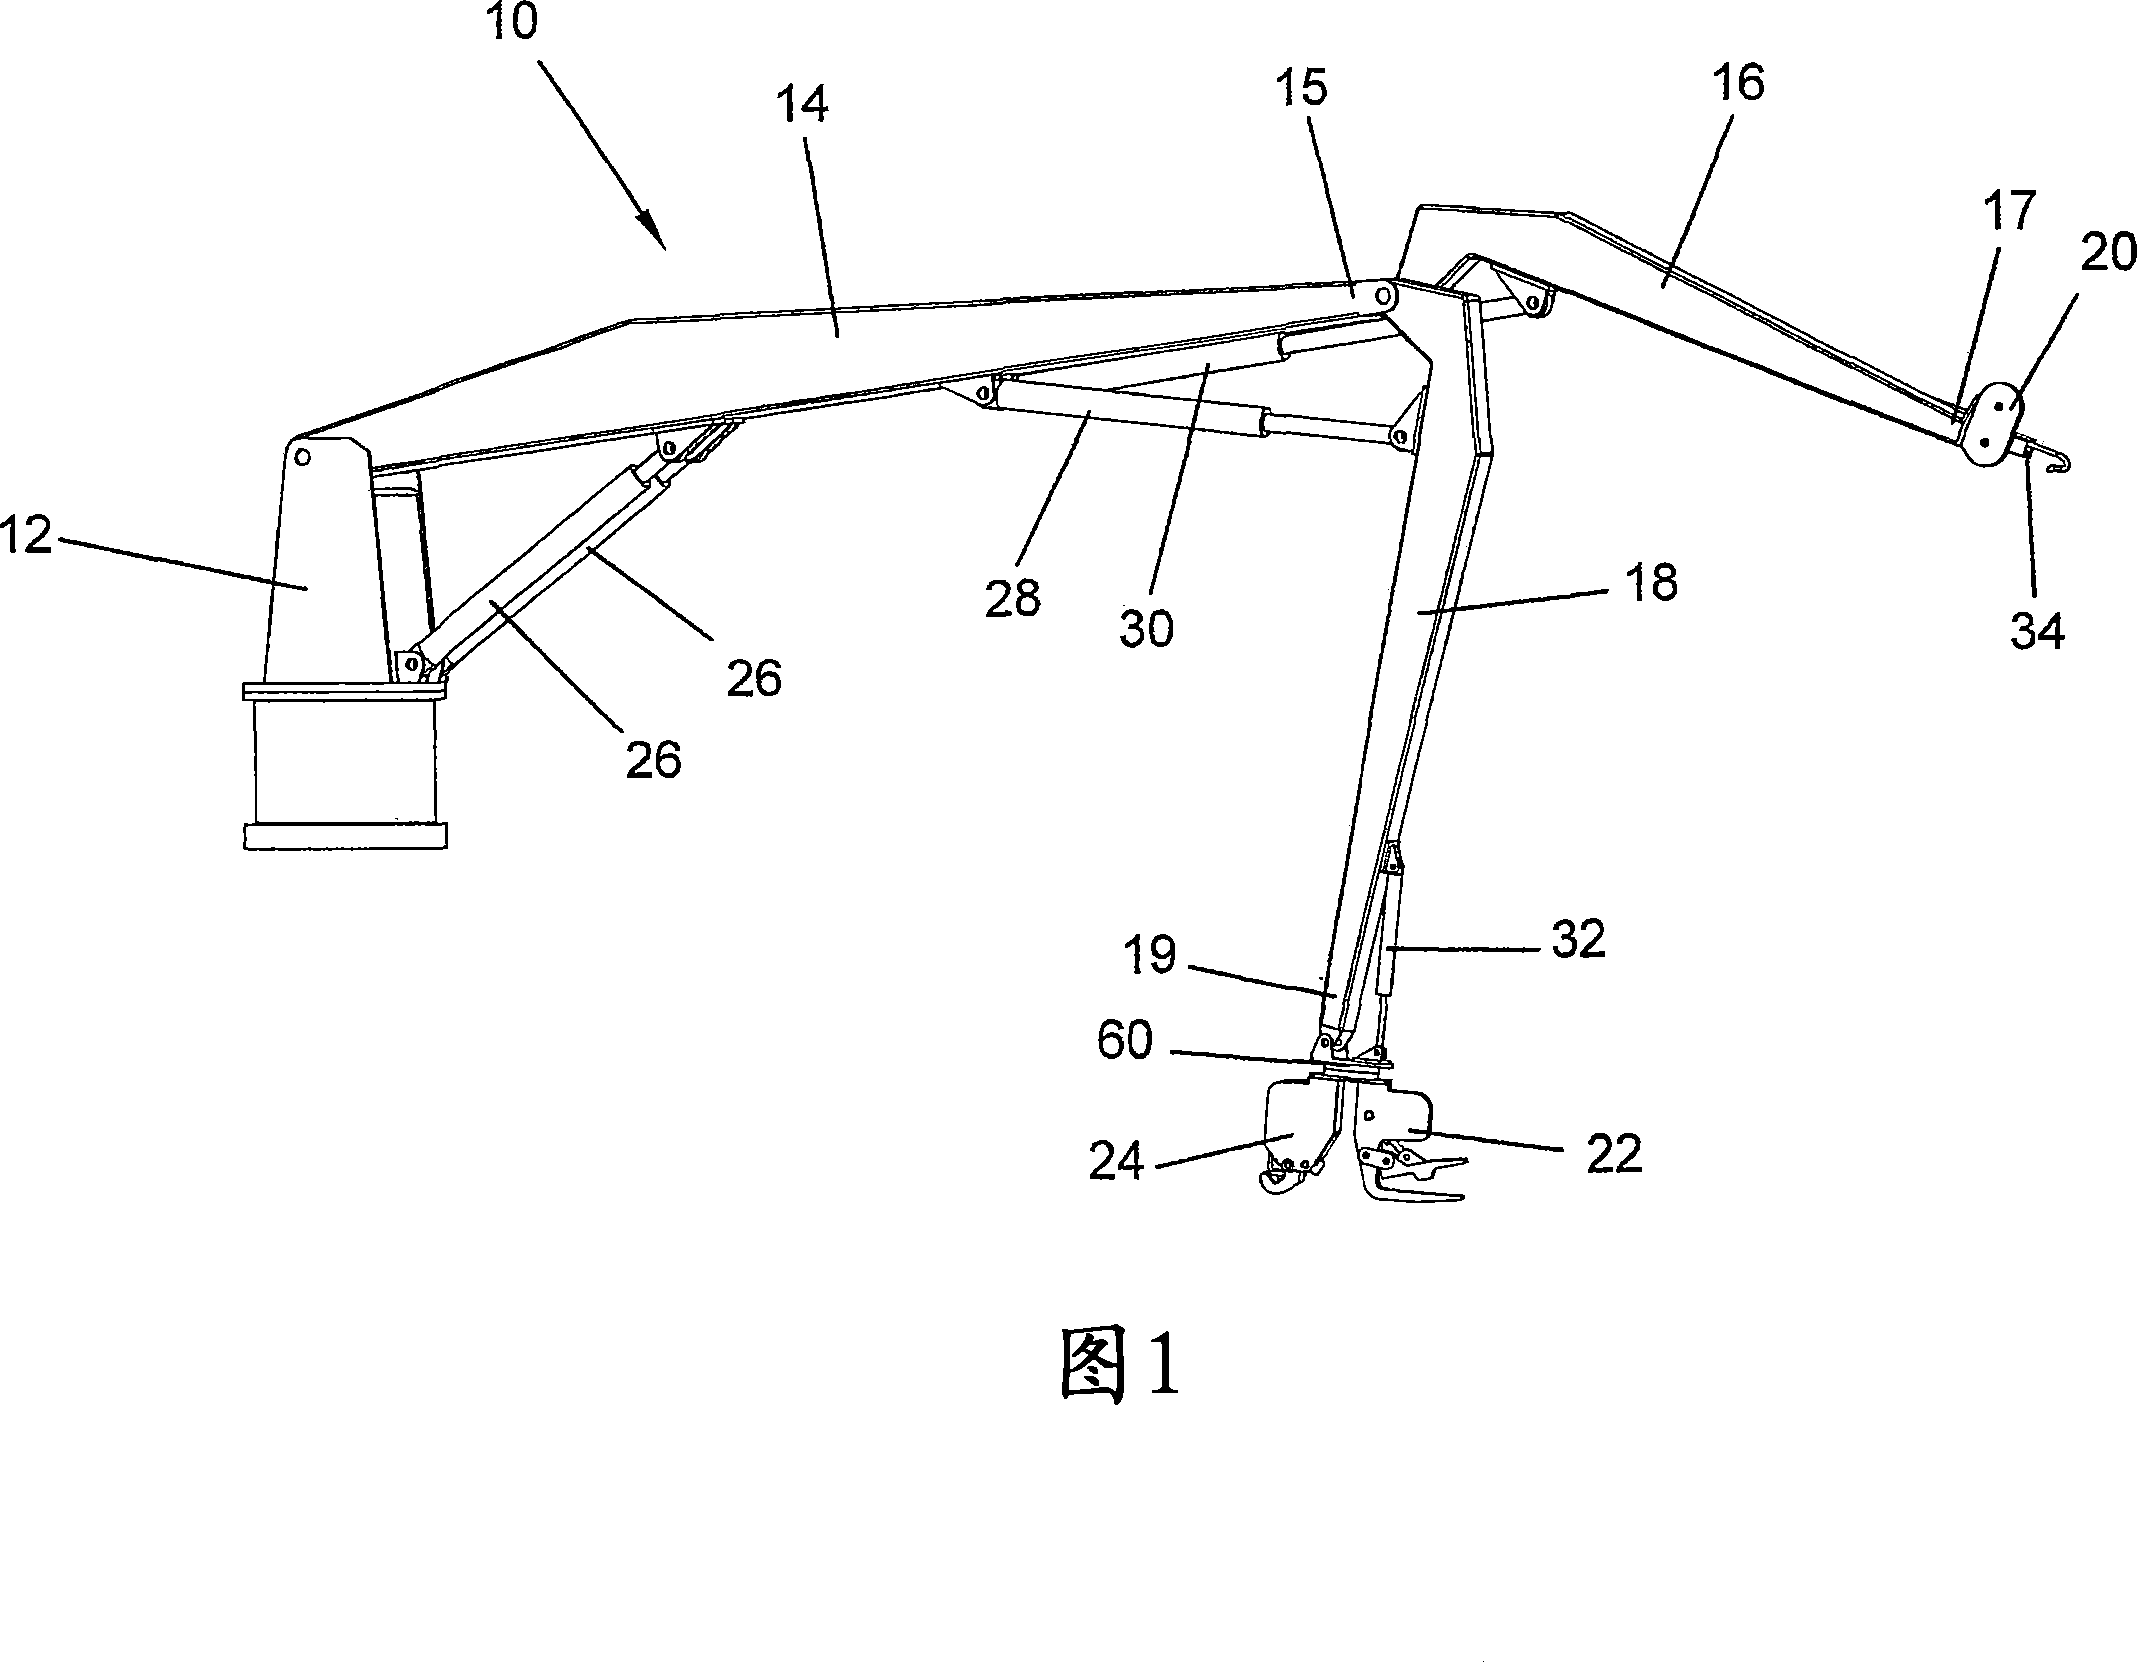 Crane for handling of chains, wires, etc., and tools for same